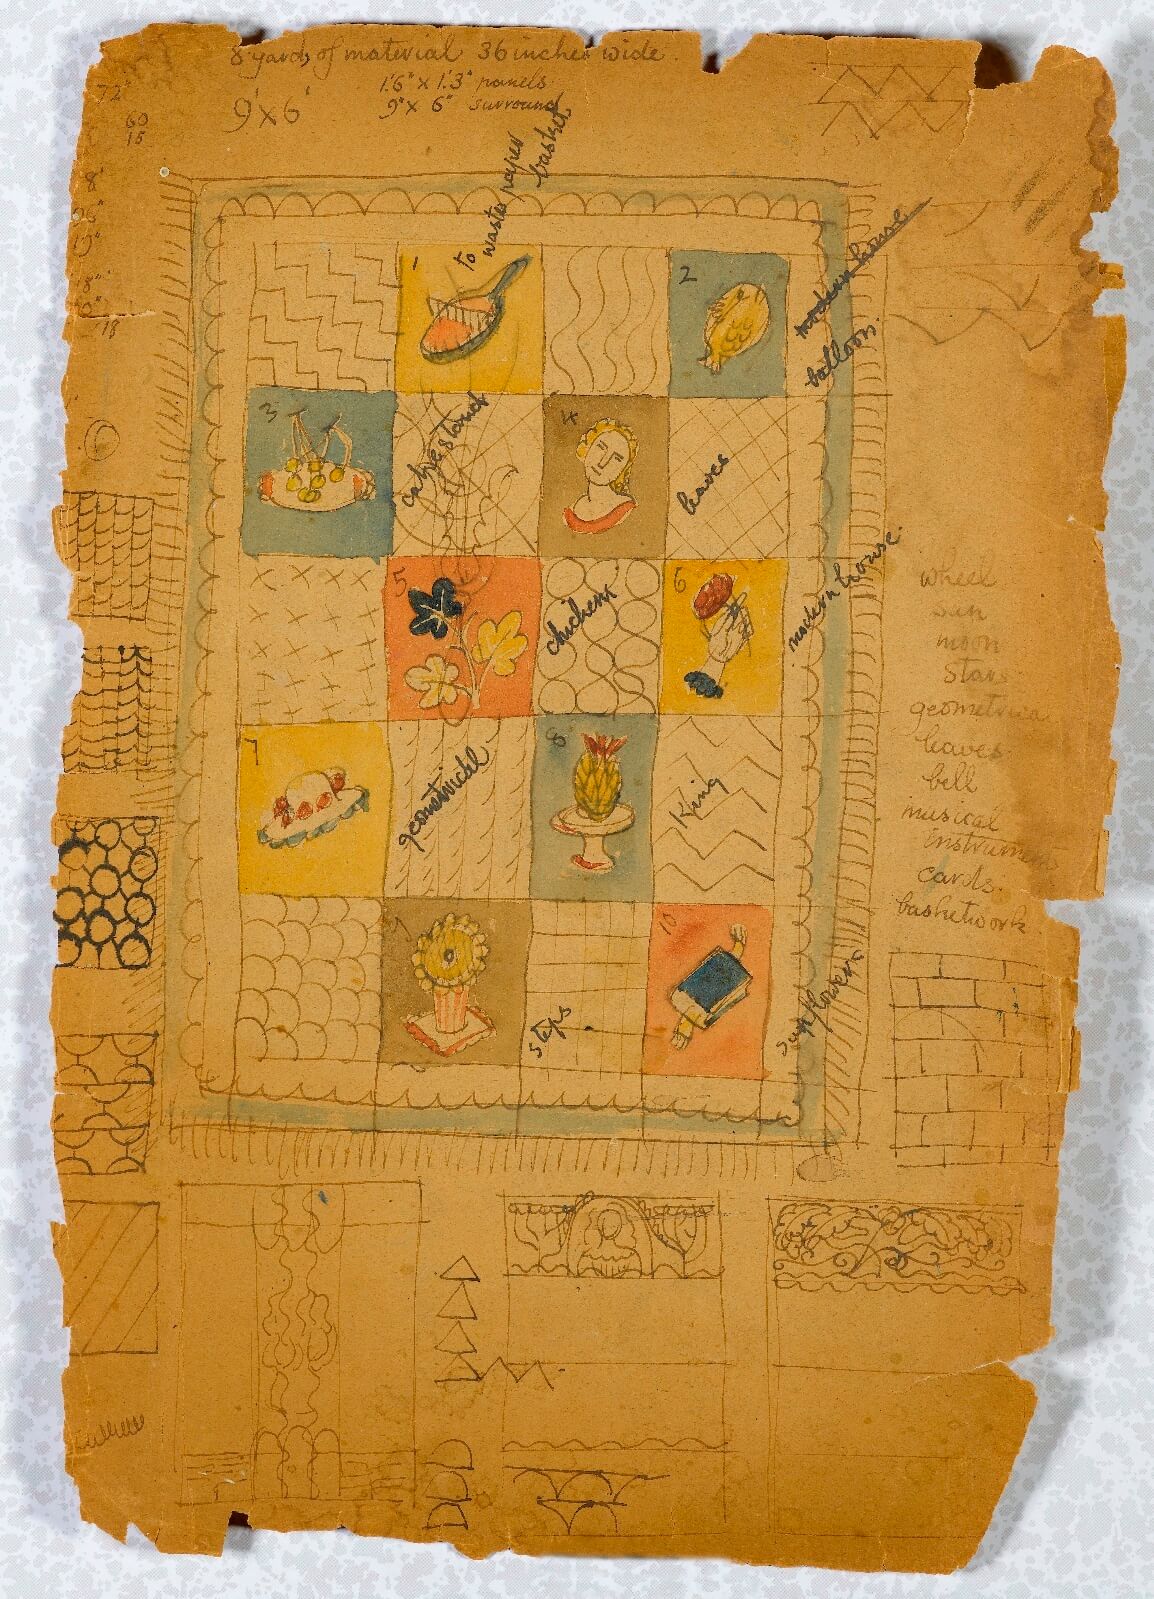 Charles Mahoney - Design for an embroidered quilt